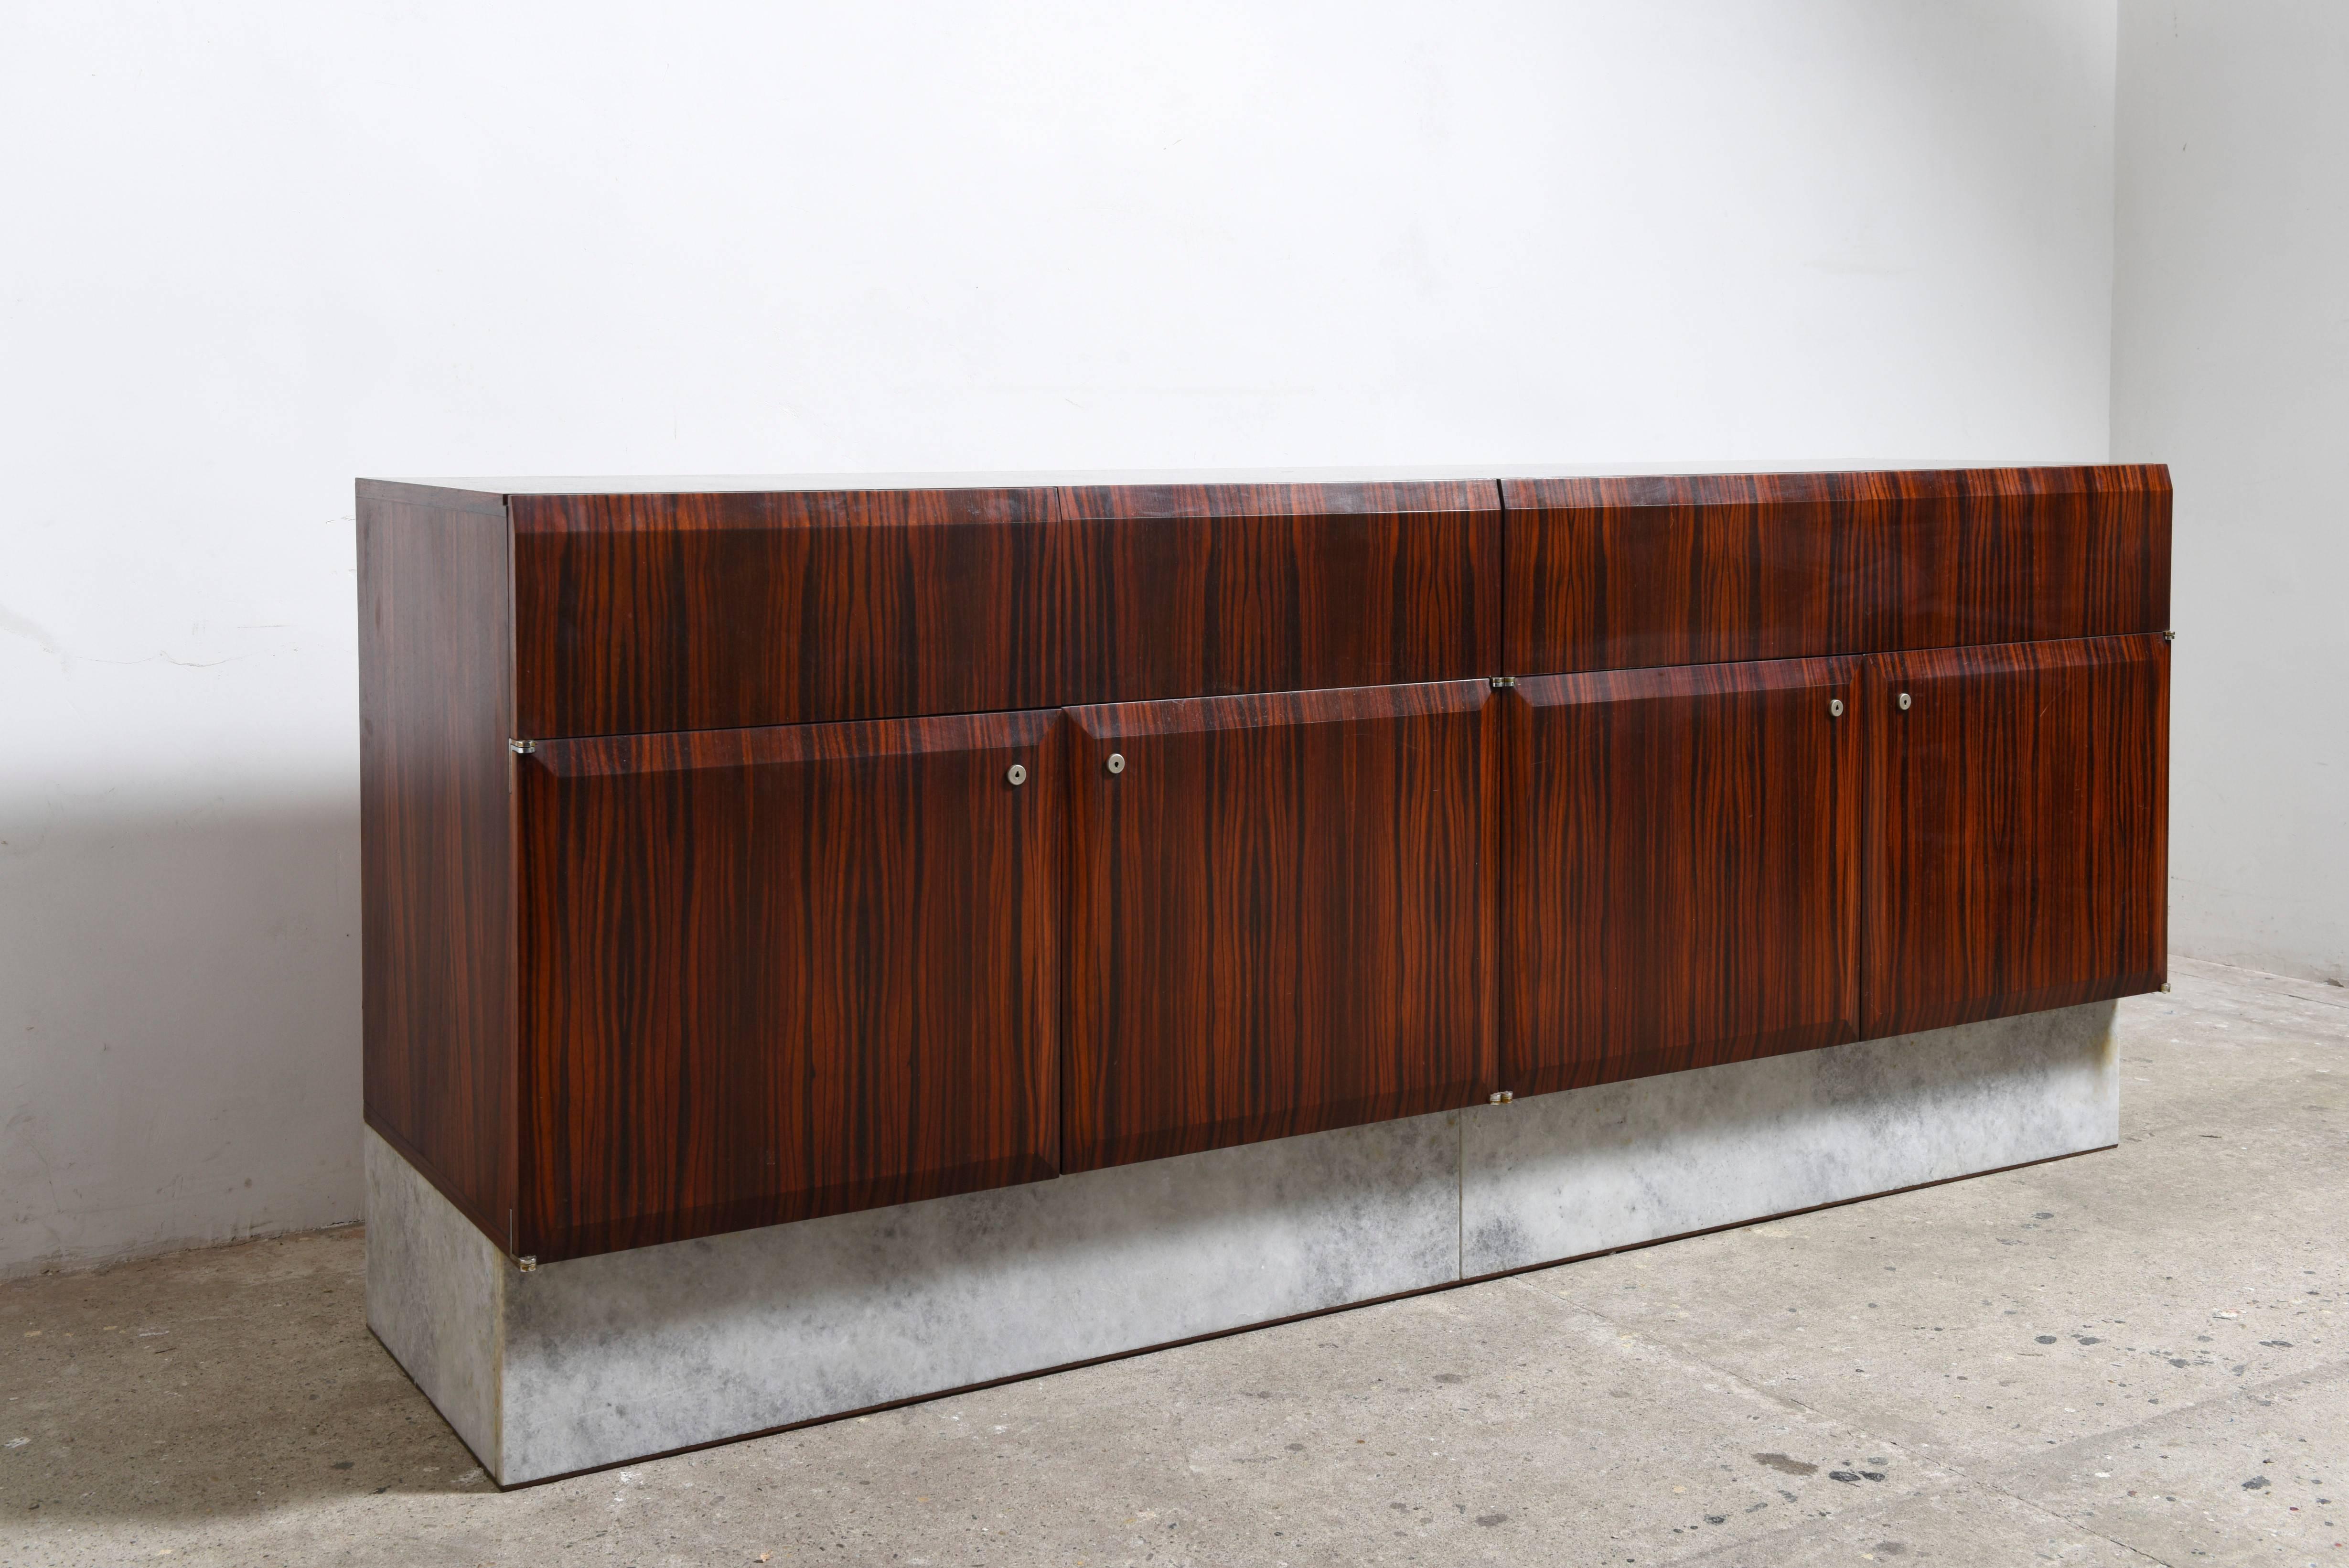 Large 1960s Belgian brutalist credenza, sideboard by De Coene Freres.
Large sideboard that stands out in craftsmanship and quality of materials.
The combination of dark massive wood and accented white marble was a challenge for the 1960s.

 

The